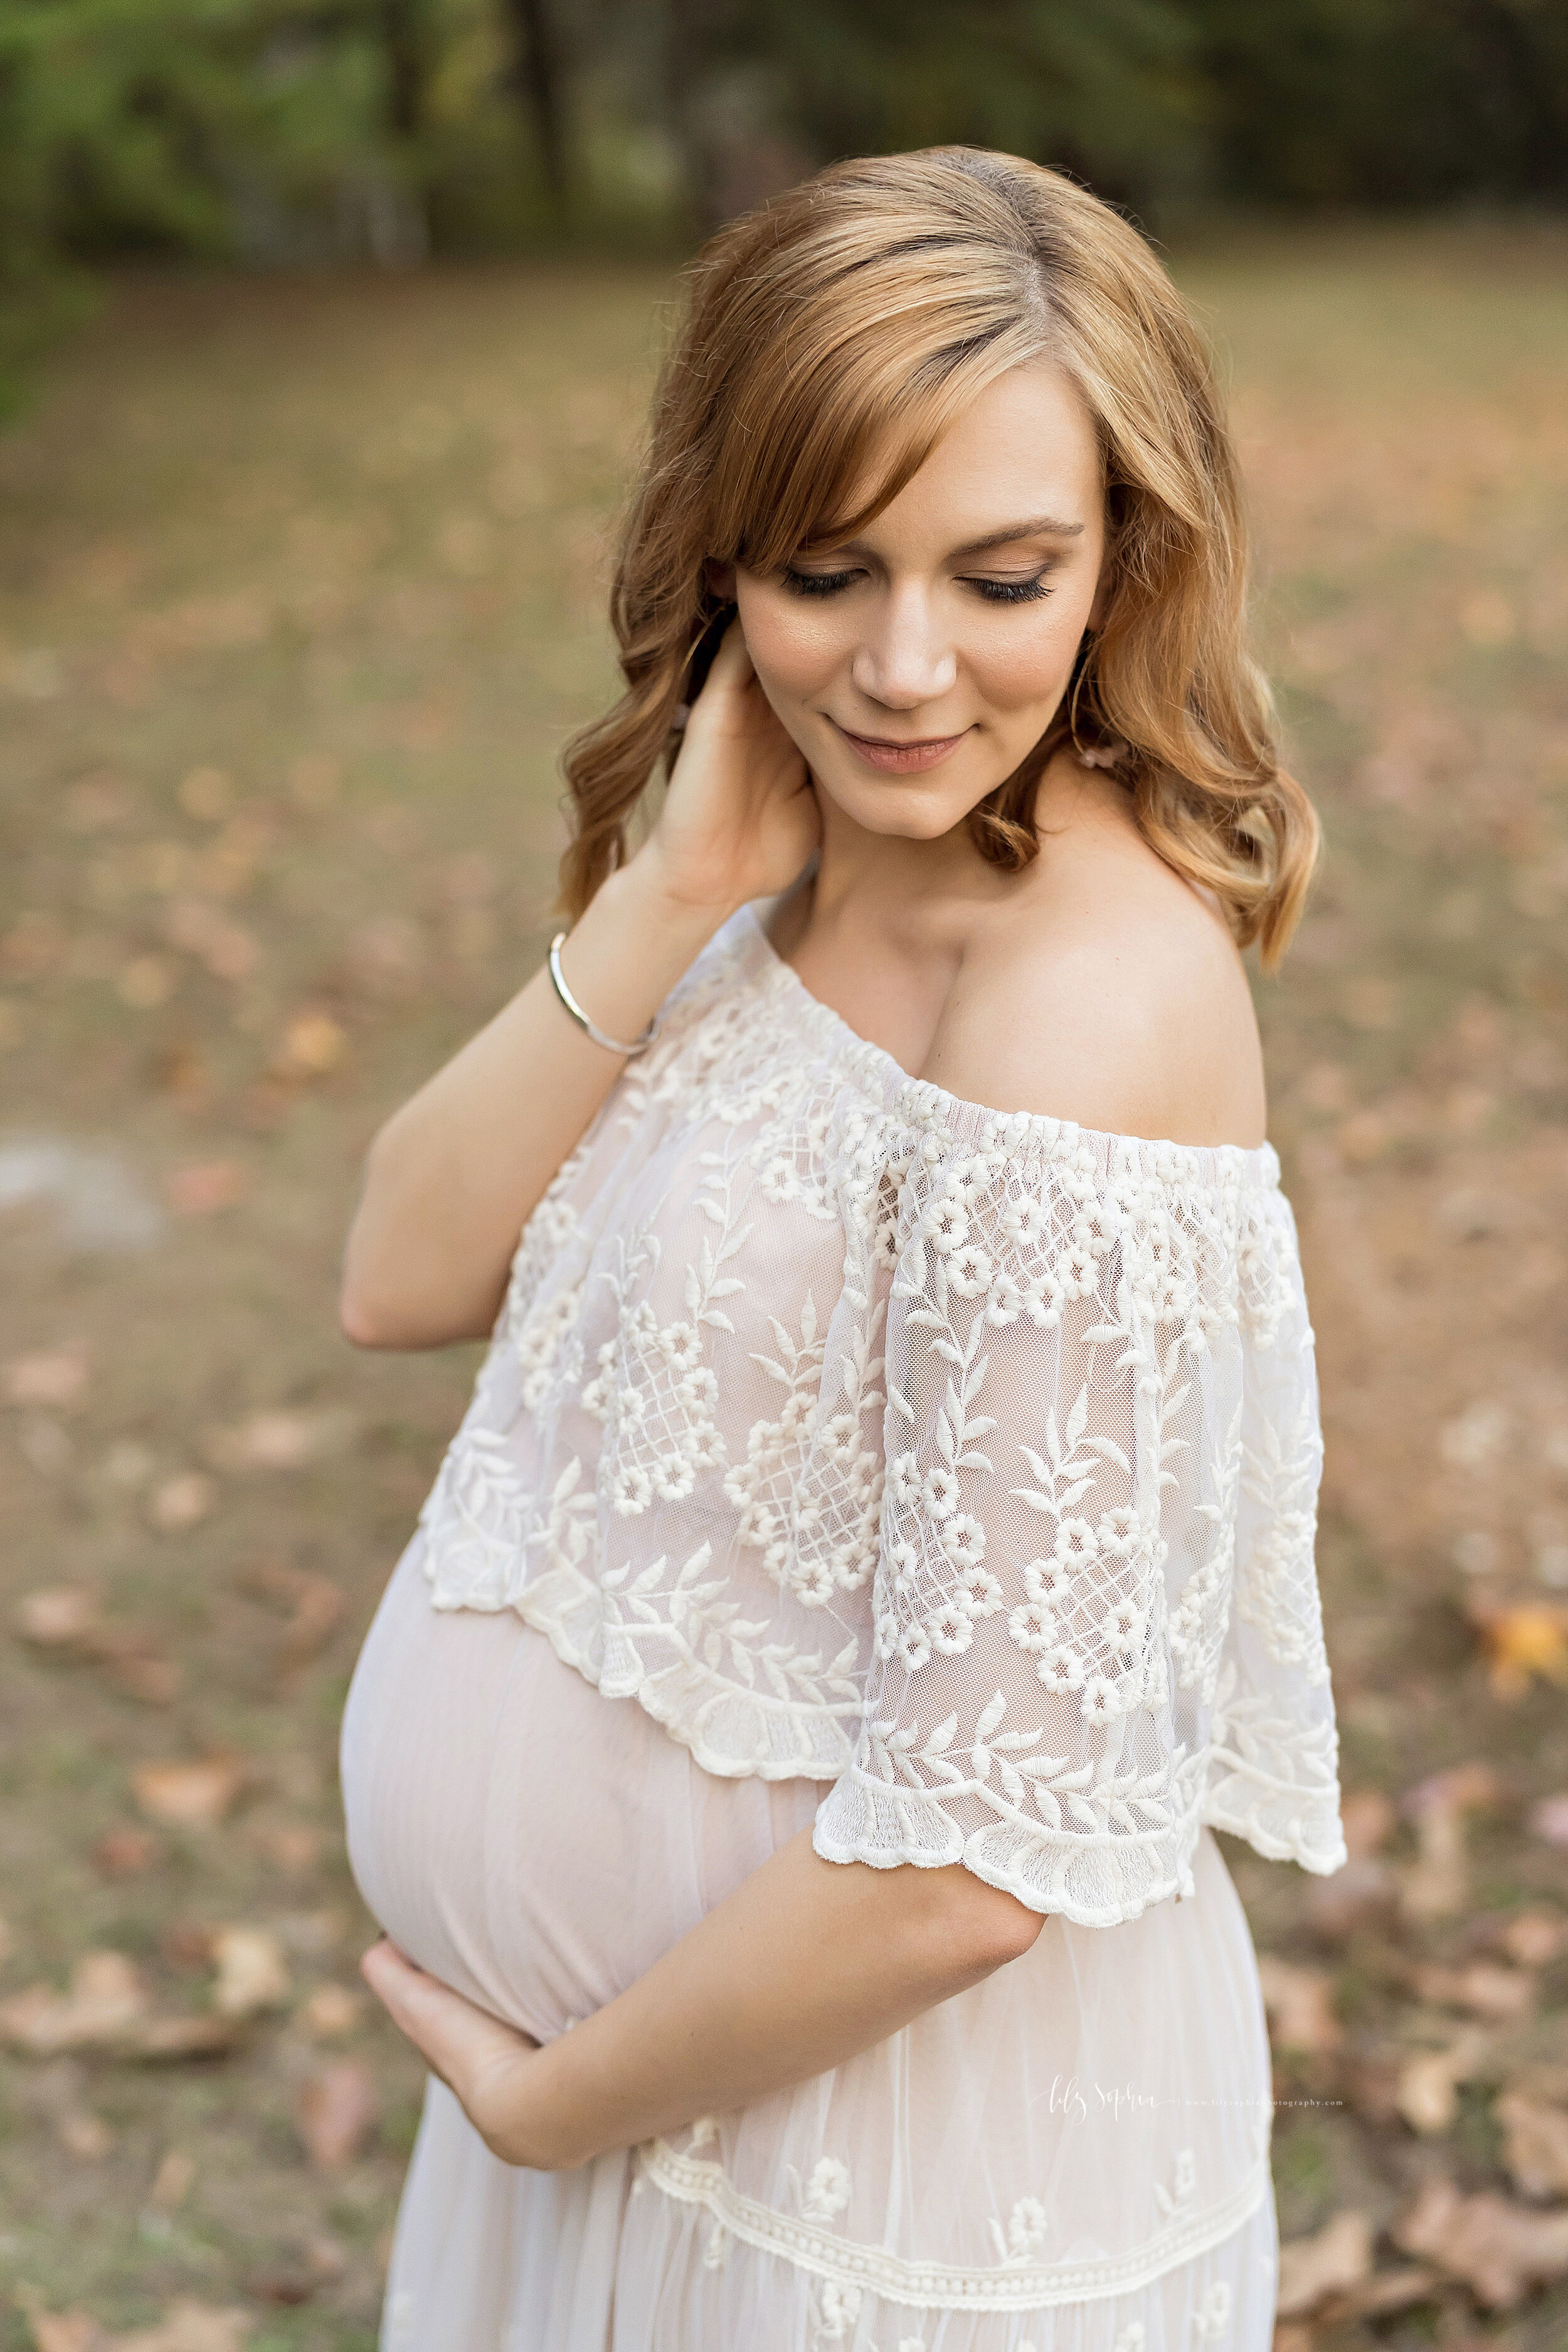  Maternity photo of a red-haired woman as she stands in a white off -the-shoulder dress in an Atlanta park  during autumn with her right hand on her neck and her left hand holding her child in utero as she contemplates the birth of her child. 